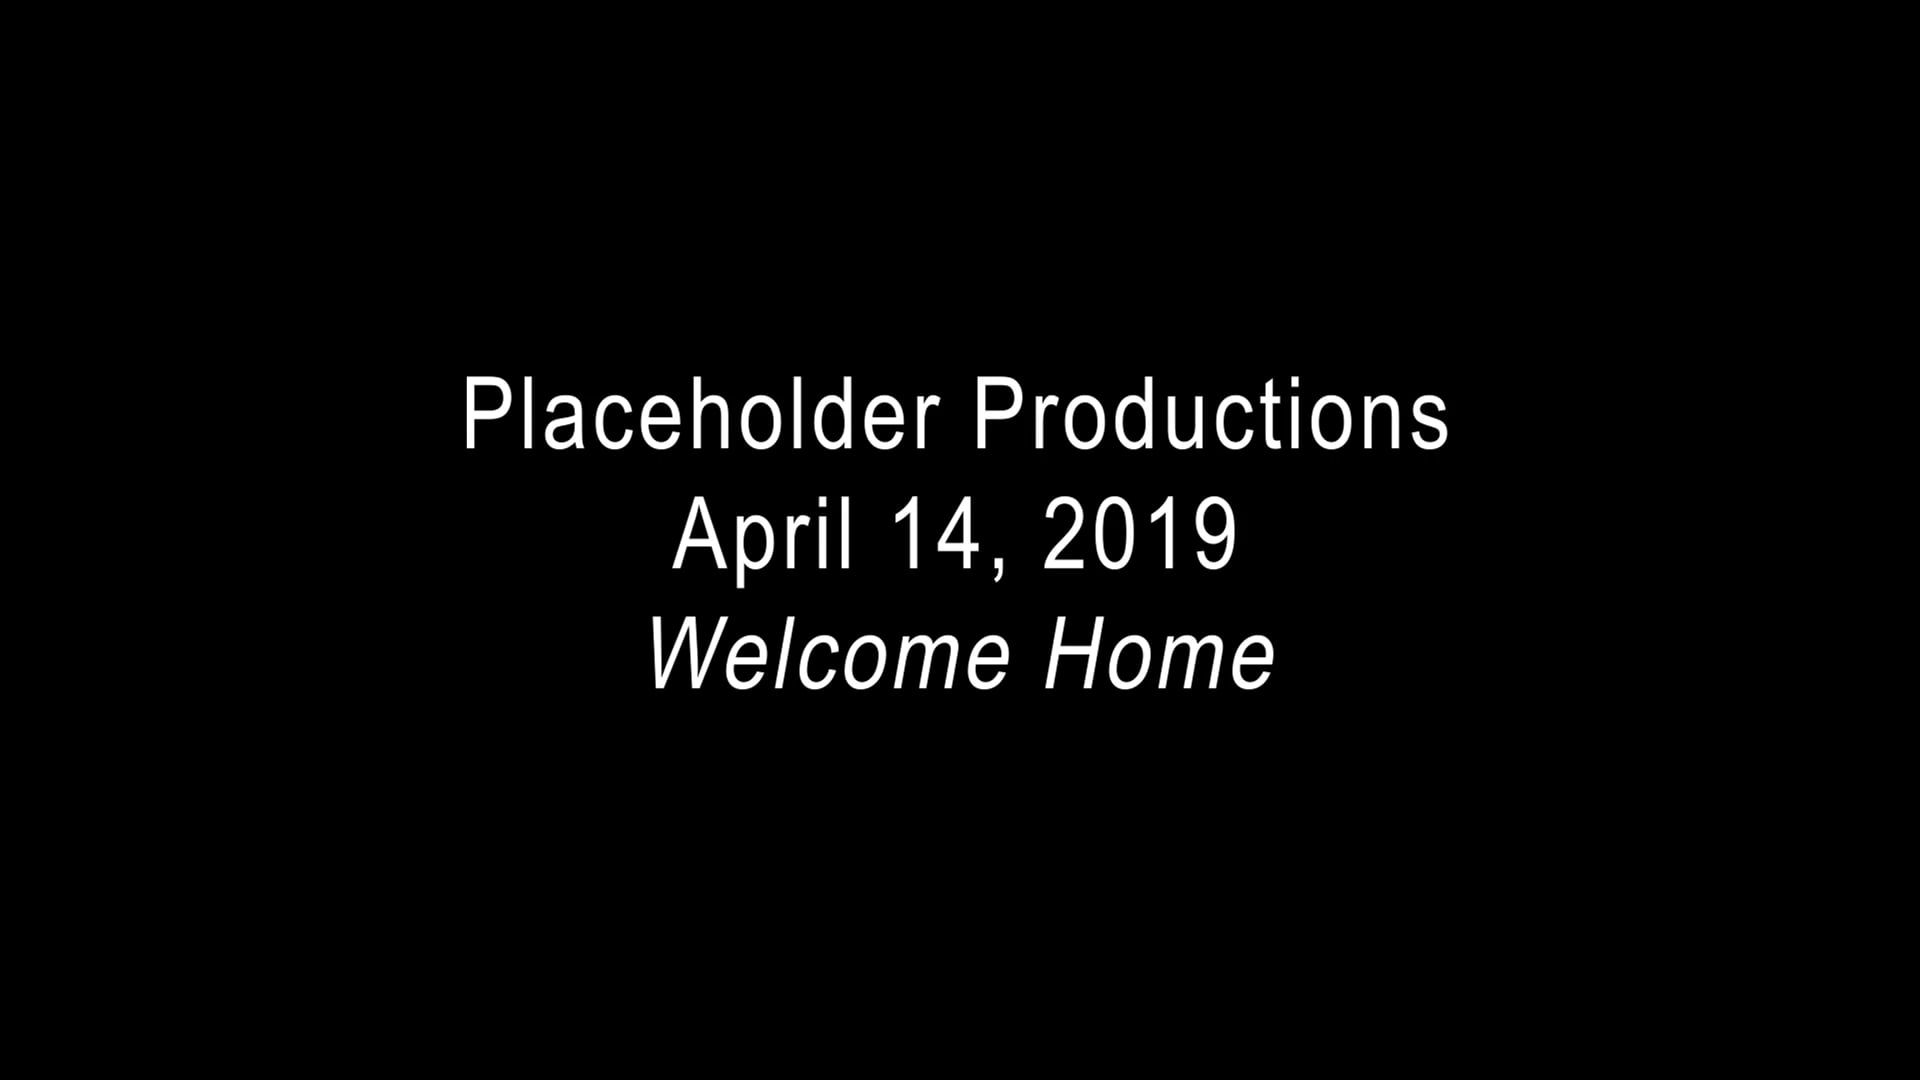 033-2019-Placeholder Productions-Welcome Home